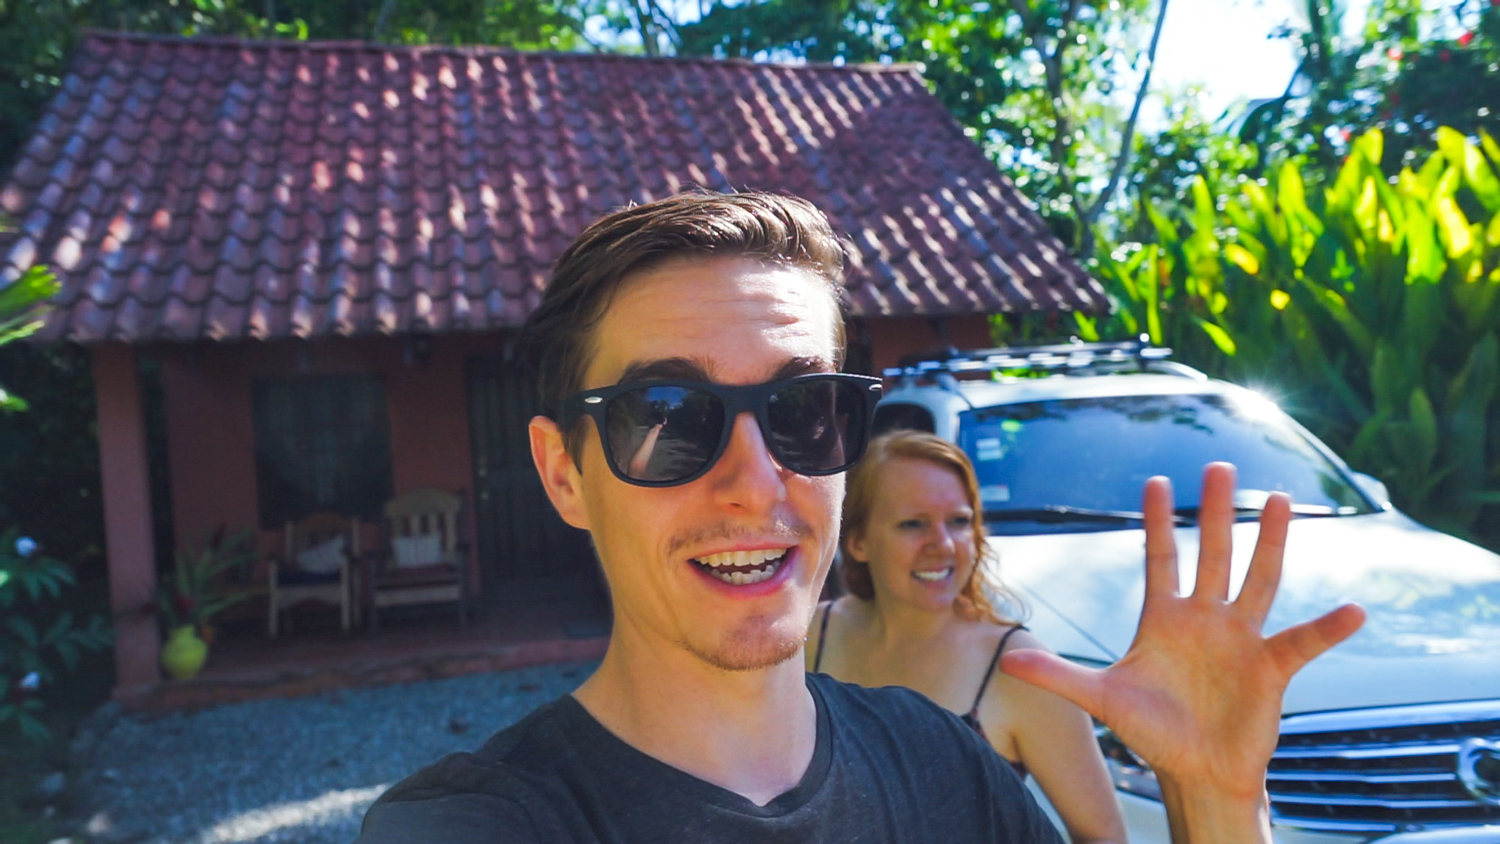 Tour of Our Costa Rican Home! - Travel Vlog